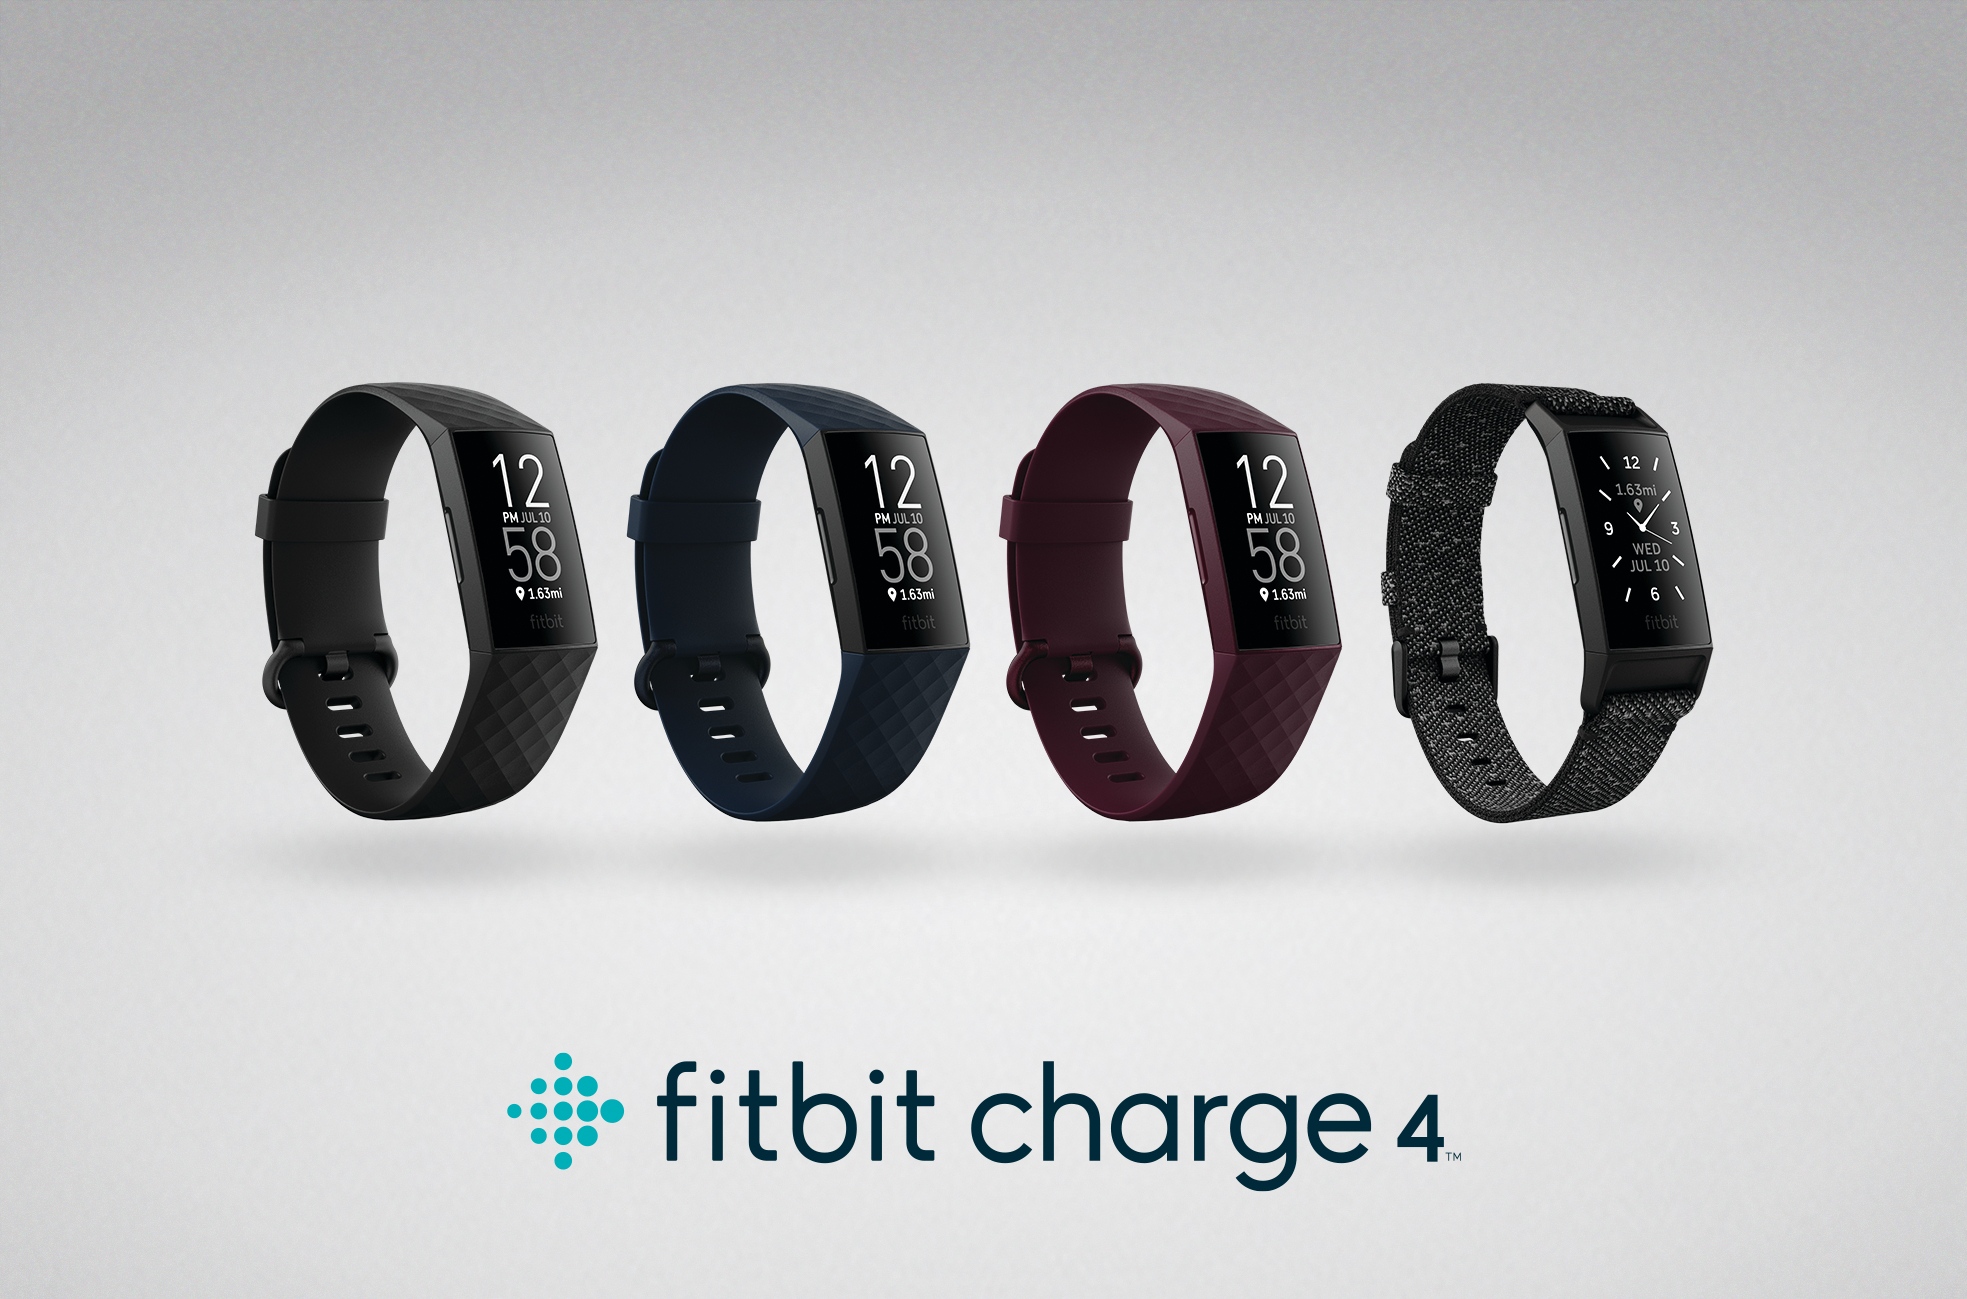 Fitbit 新出的Charge 4 終於內建了GPS